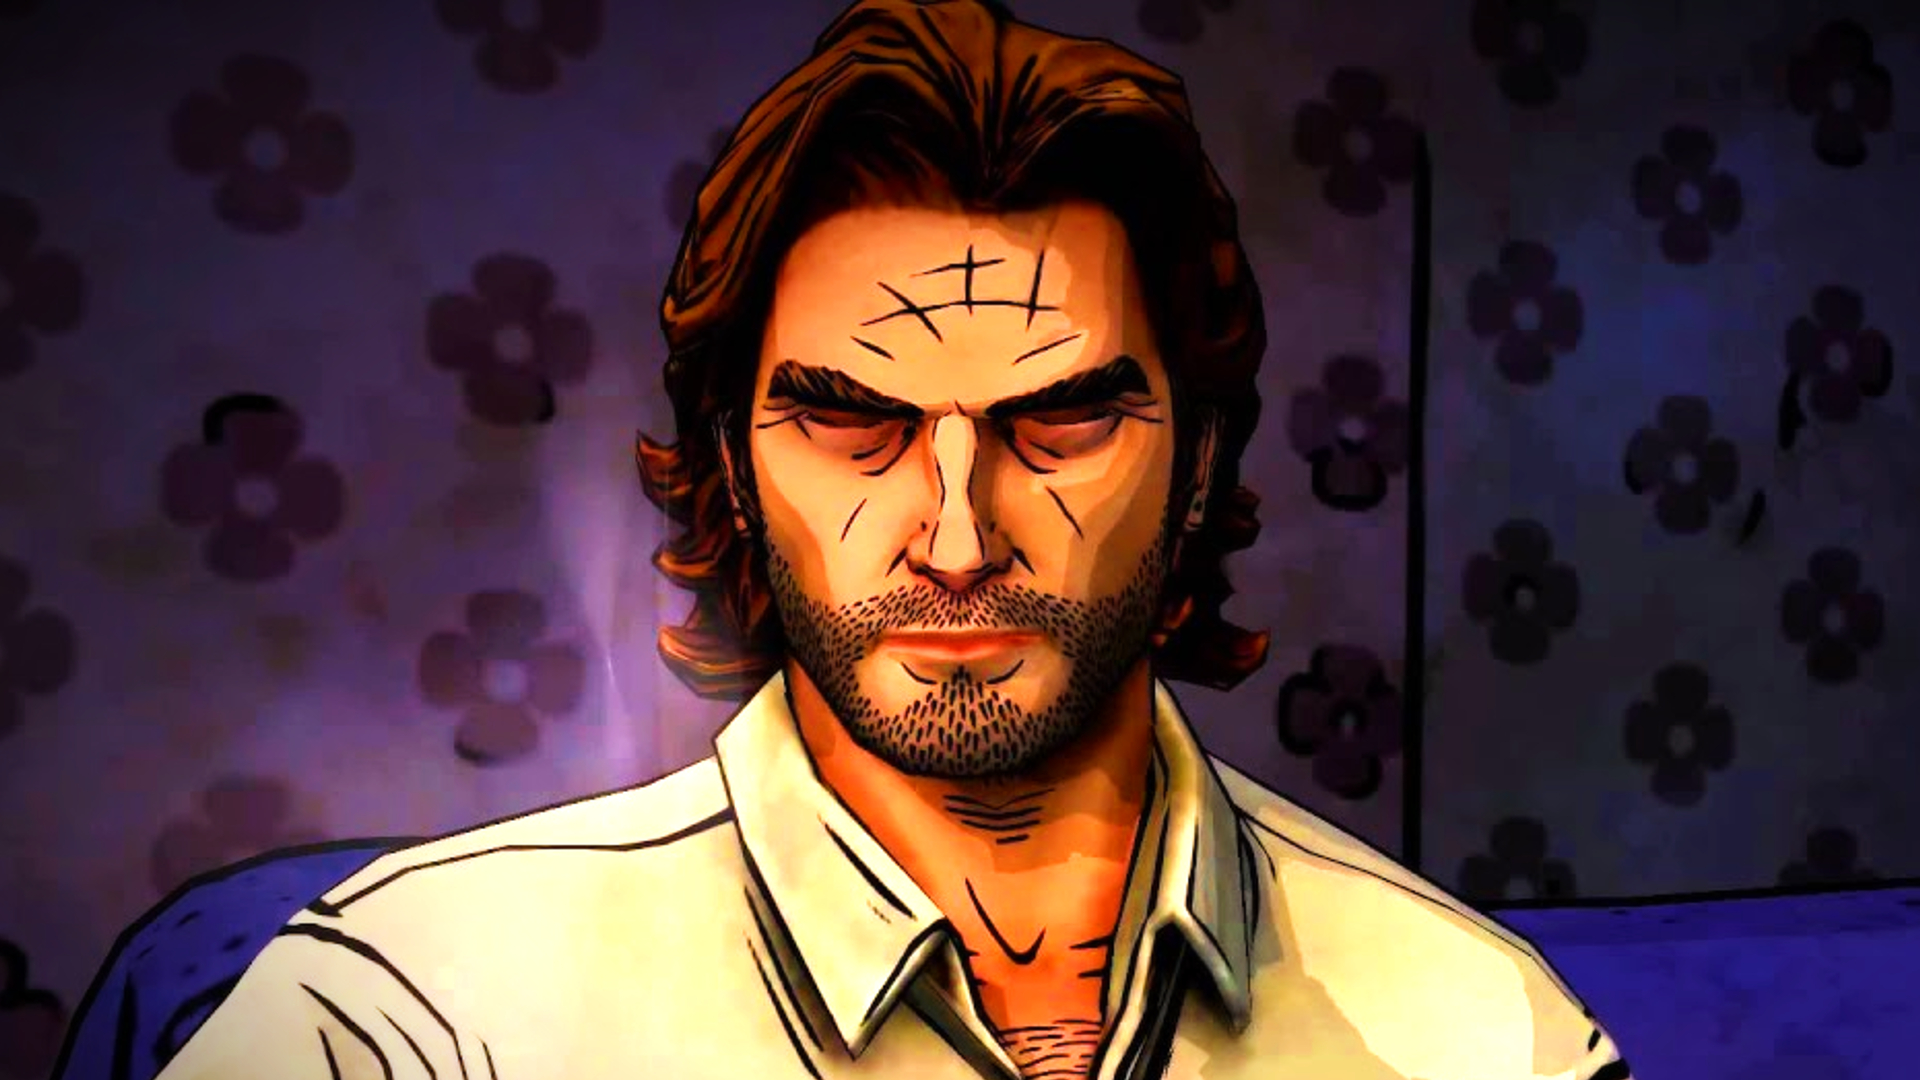 The Wolf Among Us 2' First Trailer Confirms 2023 Release